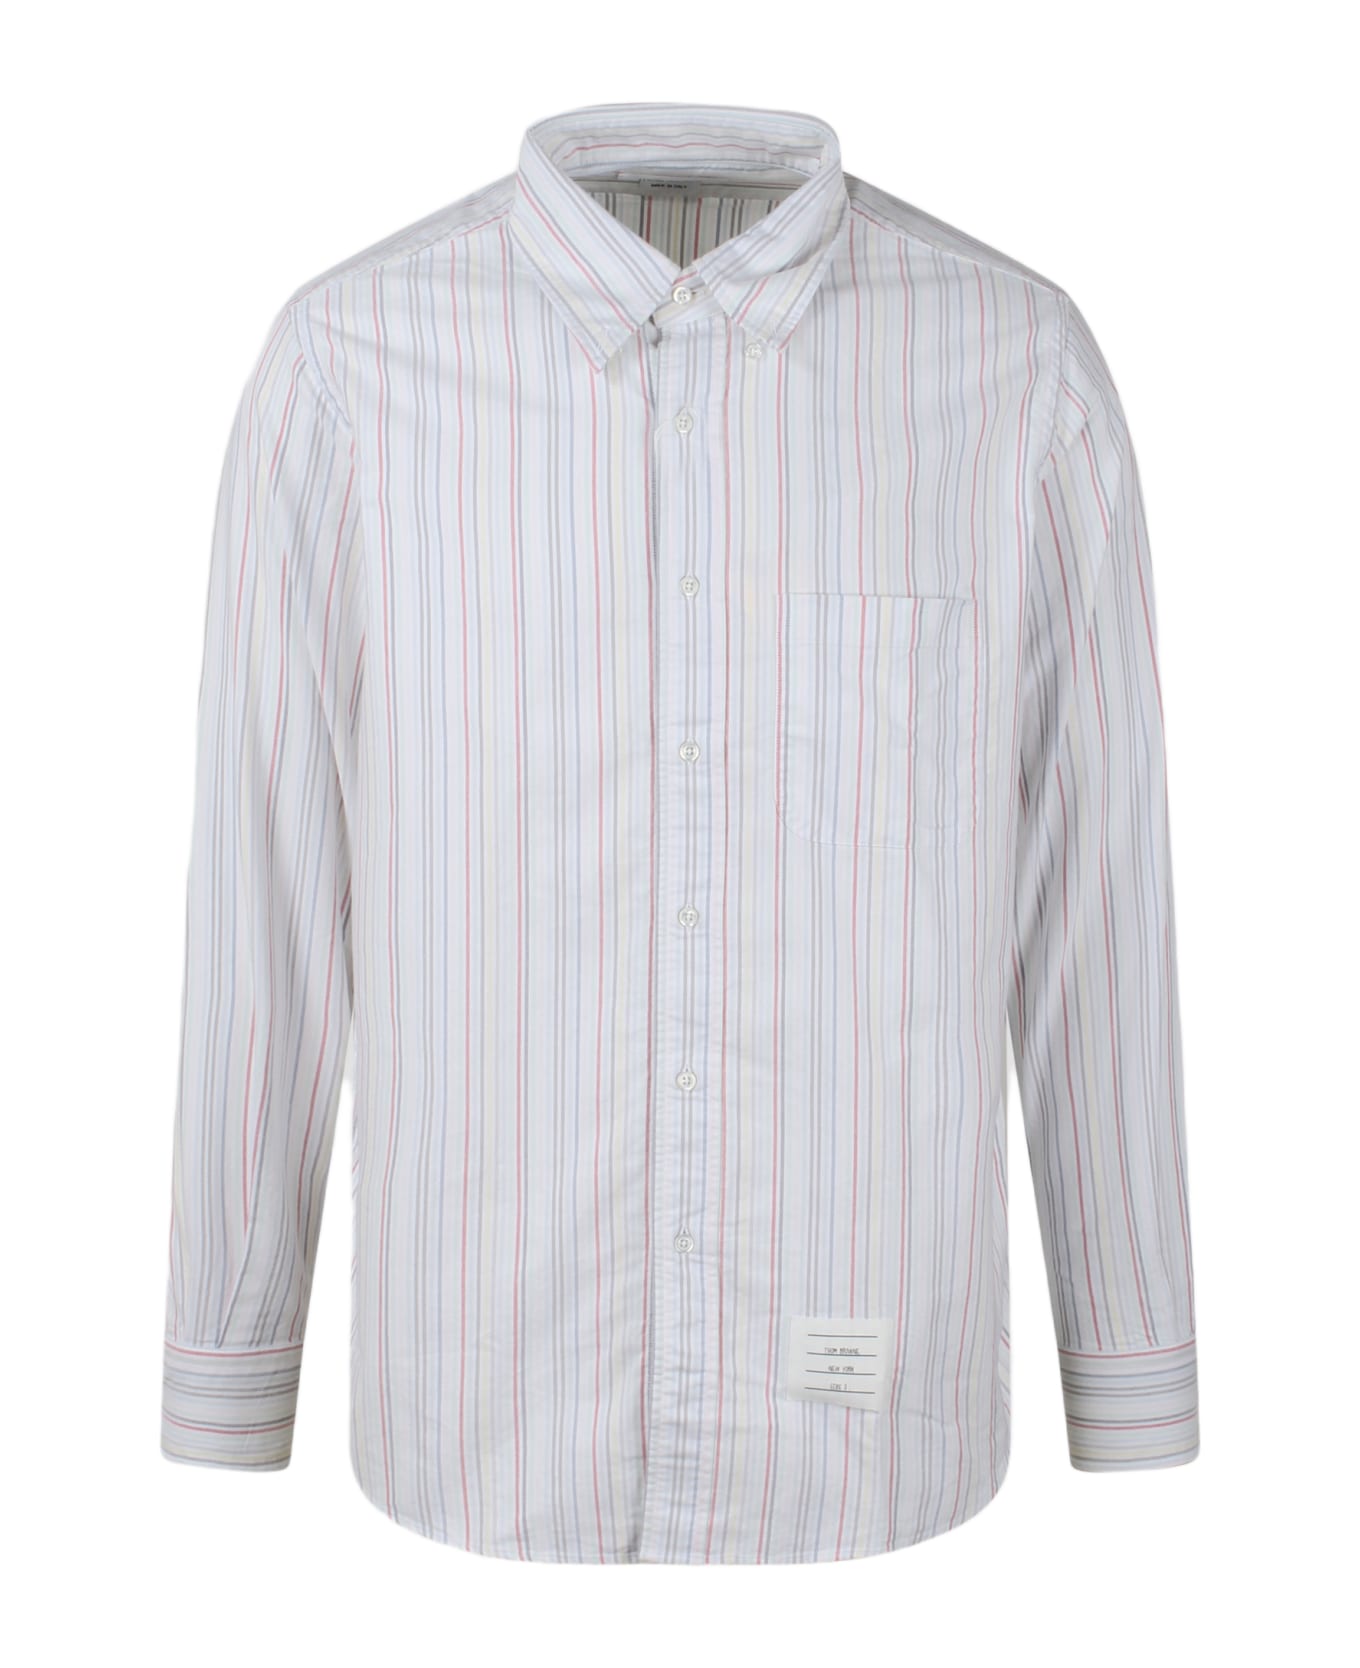 Thom Browne Straight Fit Shirt In University Stripe Oxford - Multicolour シャツ